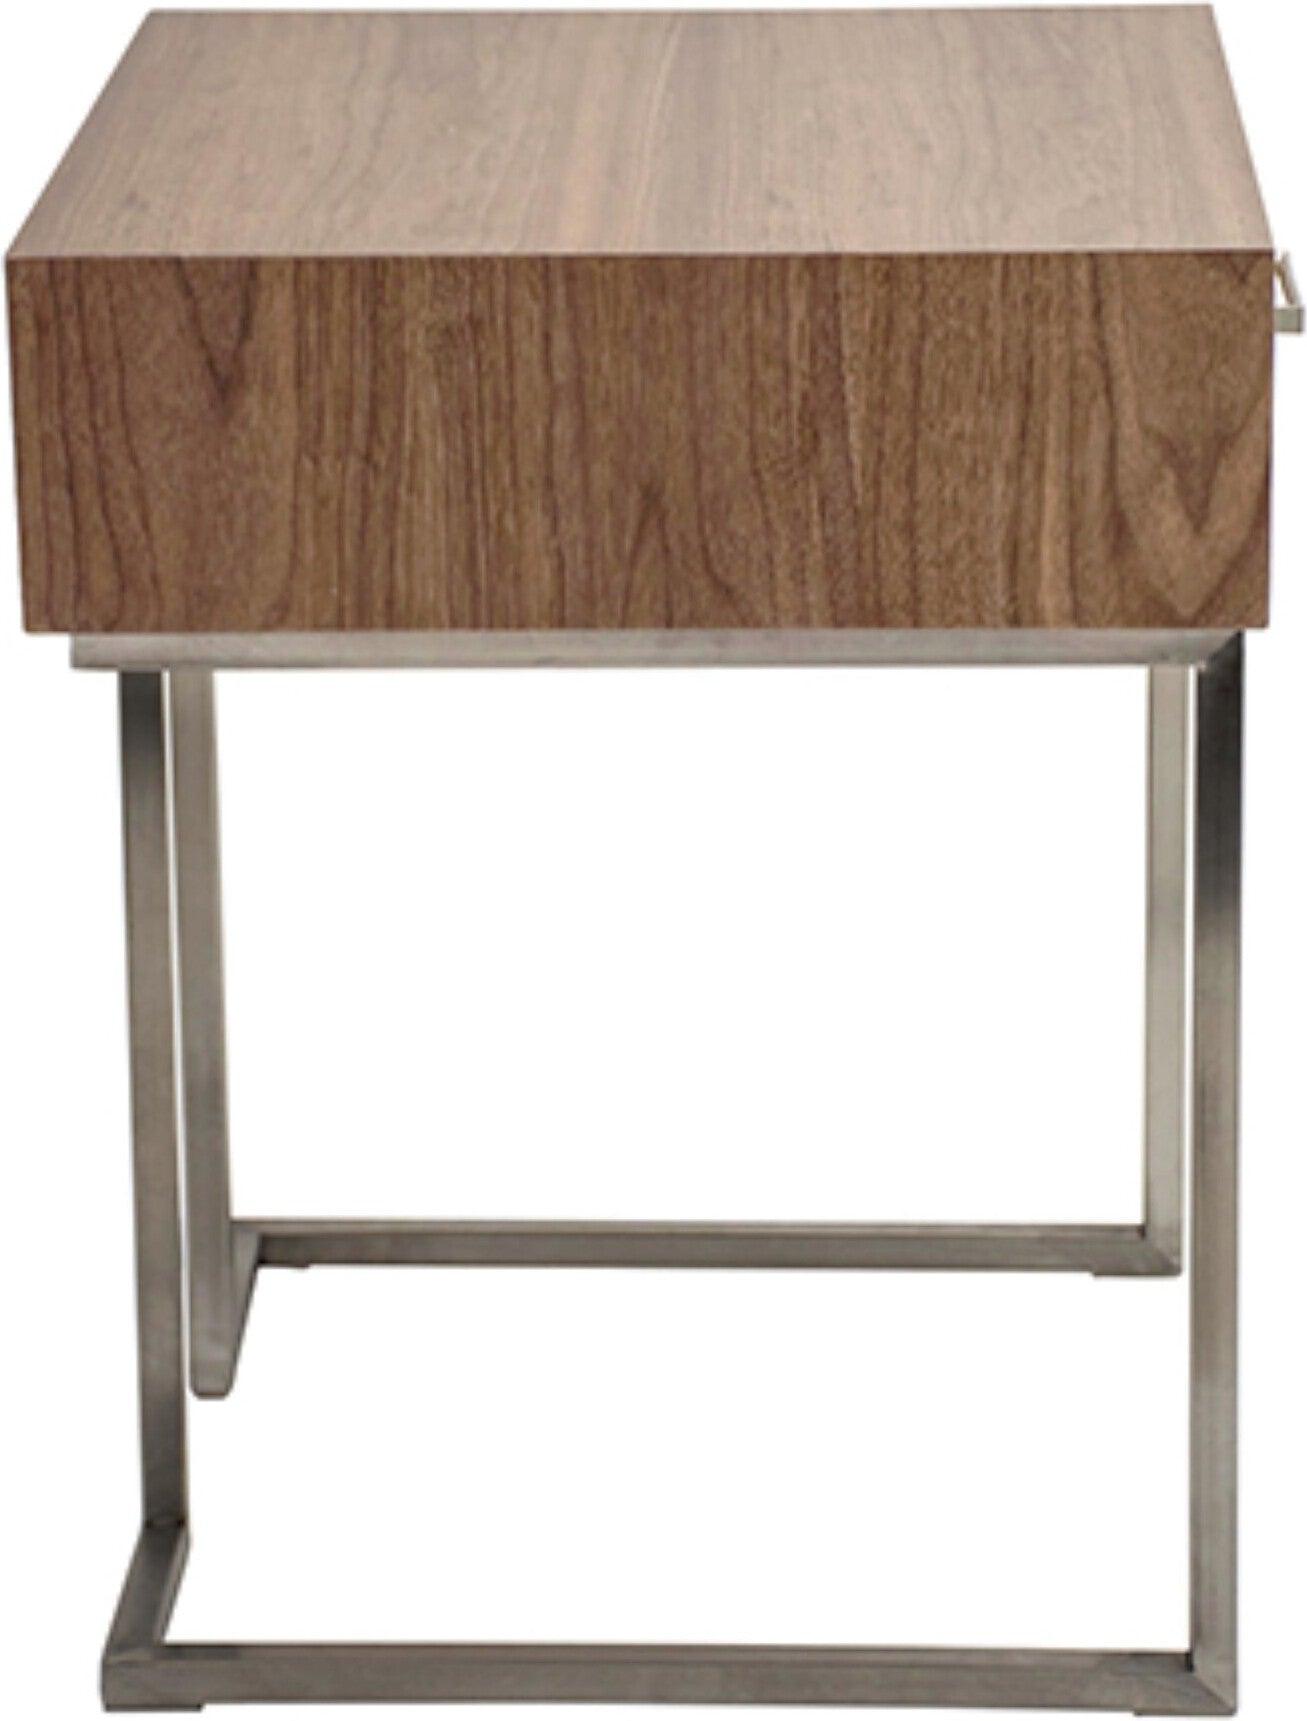 Lumisource Side & End Tables - Roman End Table Walnut & Stainless Steel Silver Frame